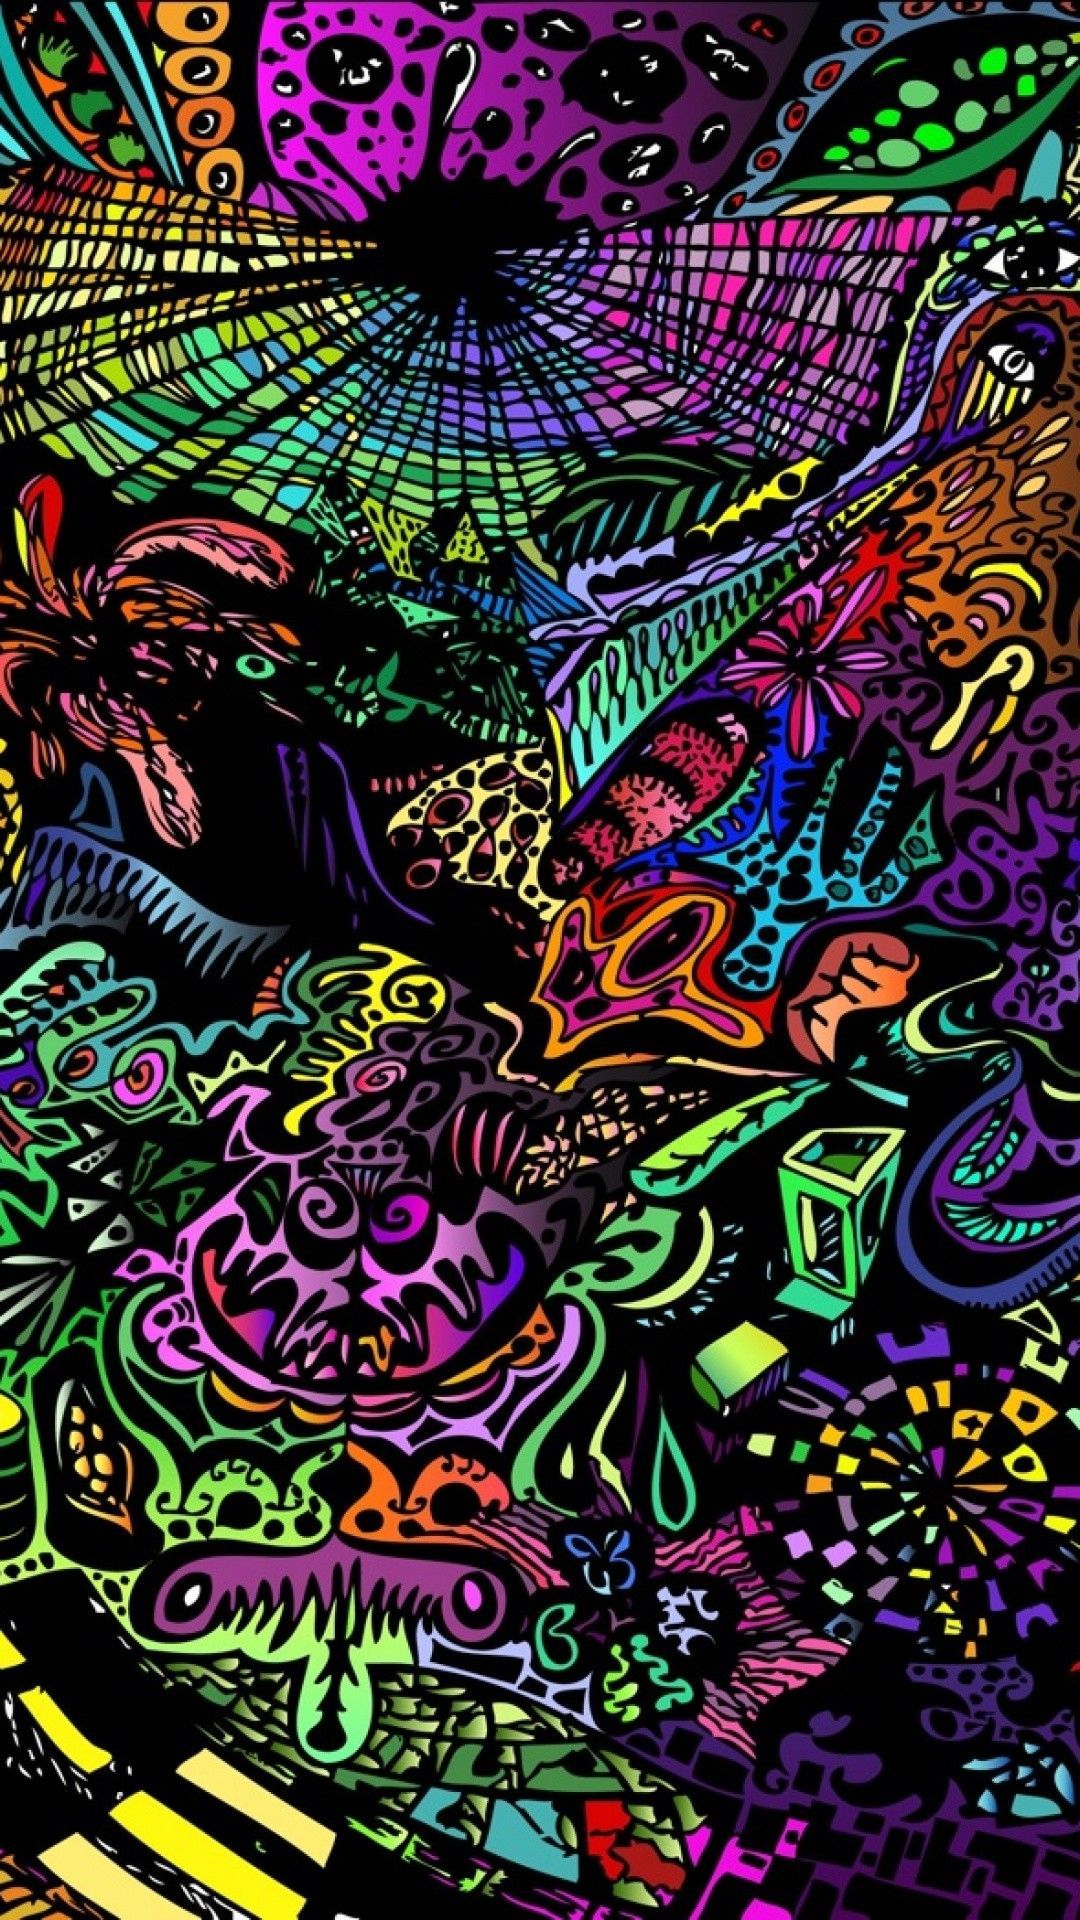 Trippy Stoner Backgrounds posted by Zoey Simpson